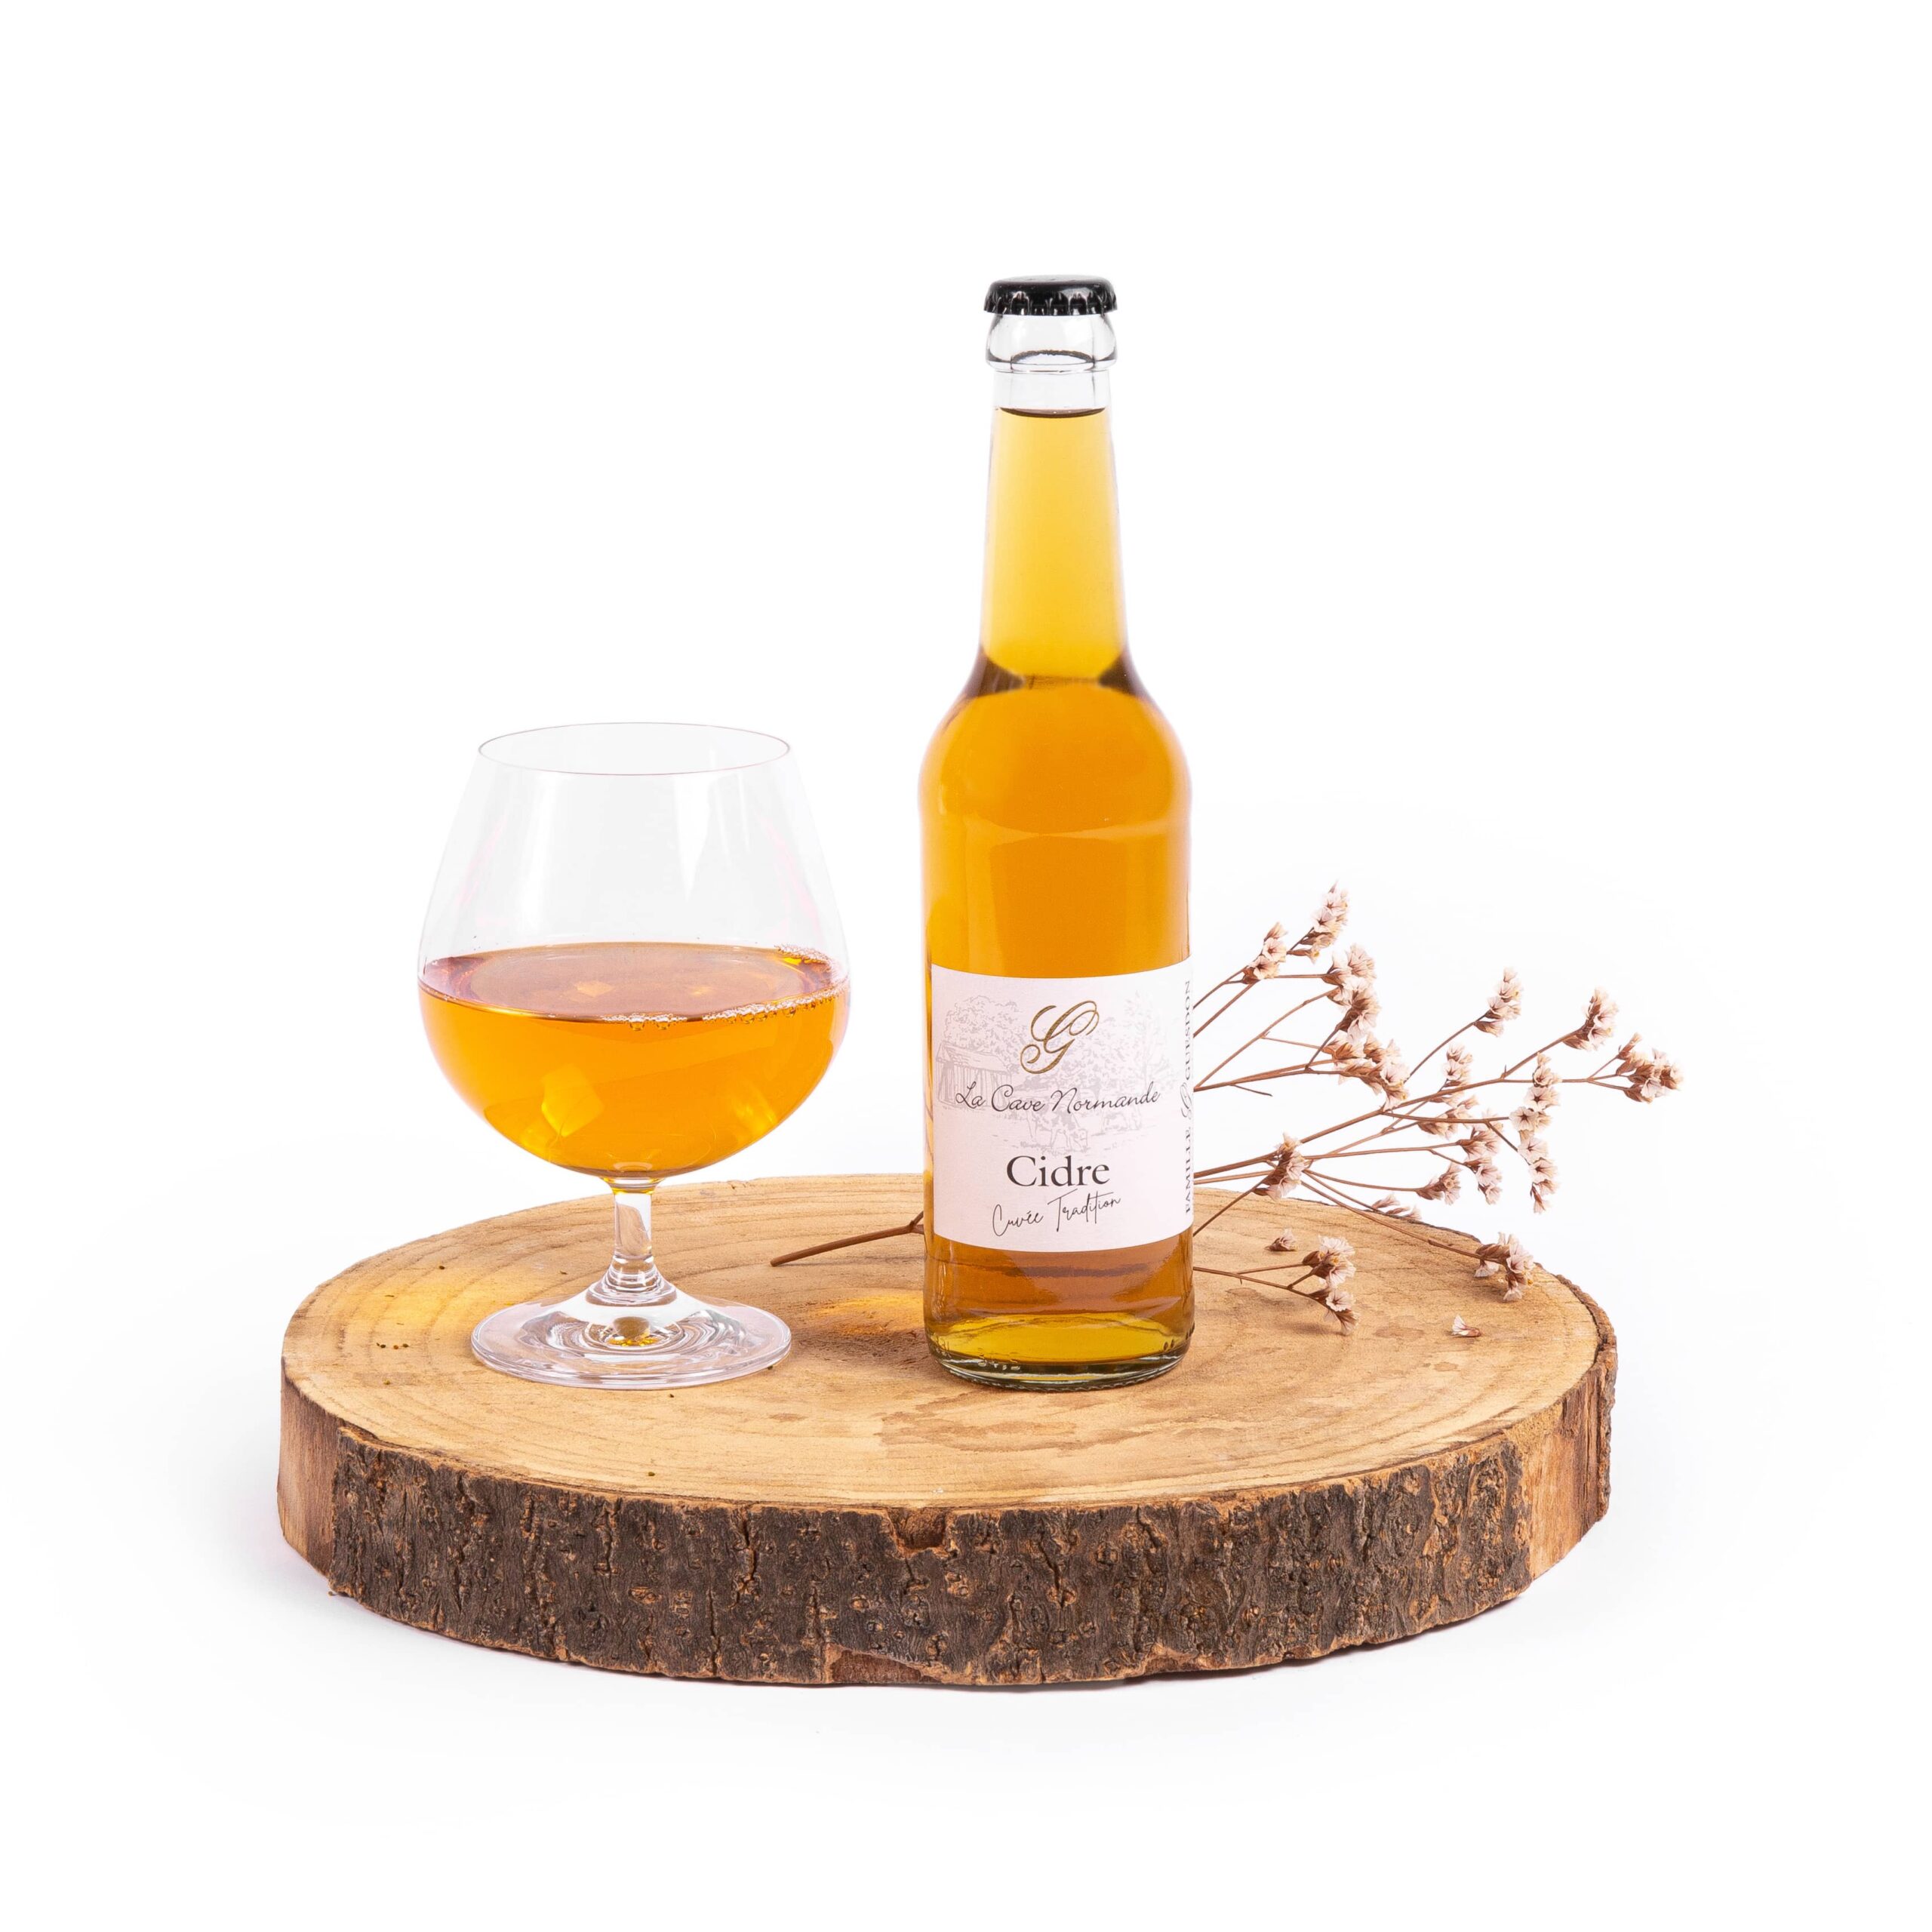 Cidre Tradition Famille Guesdon